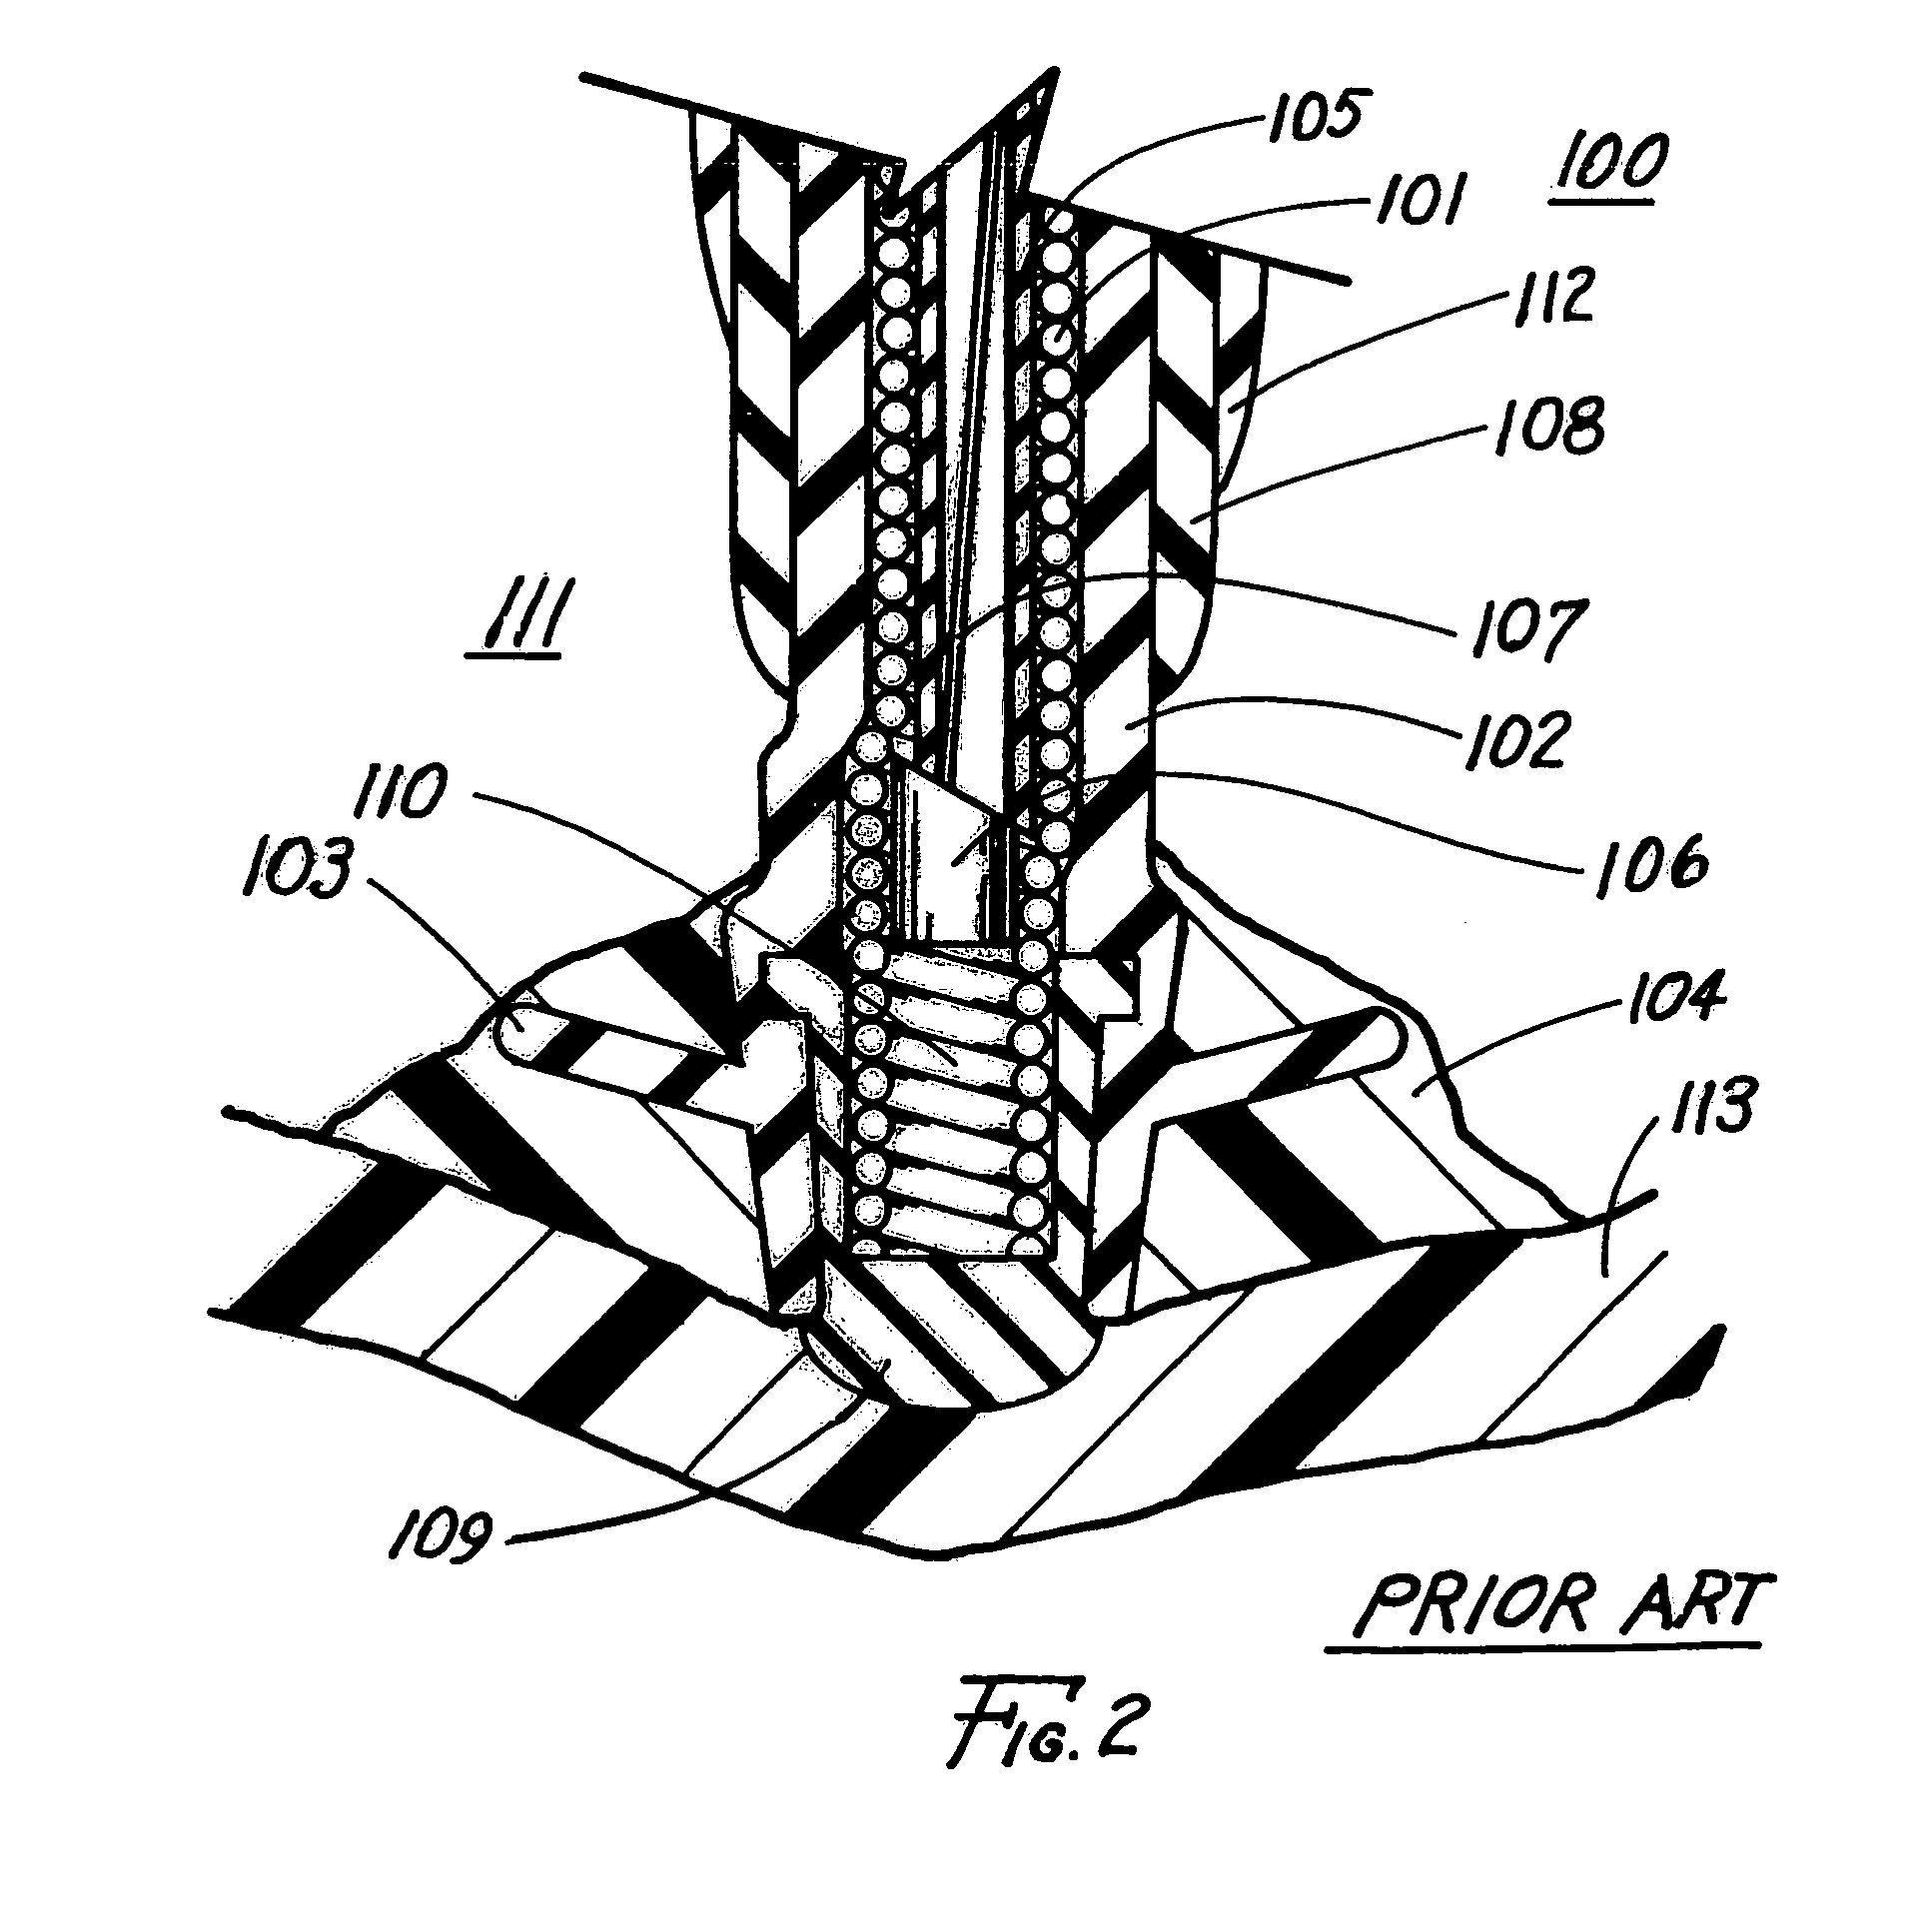 Method of removing an elongated structure implanted in biological tissue